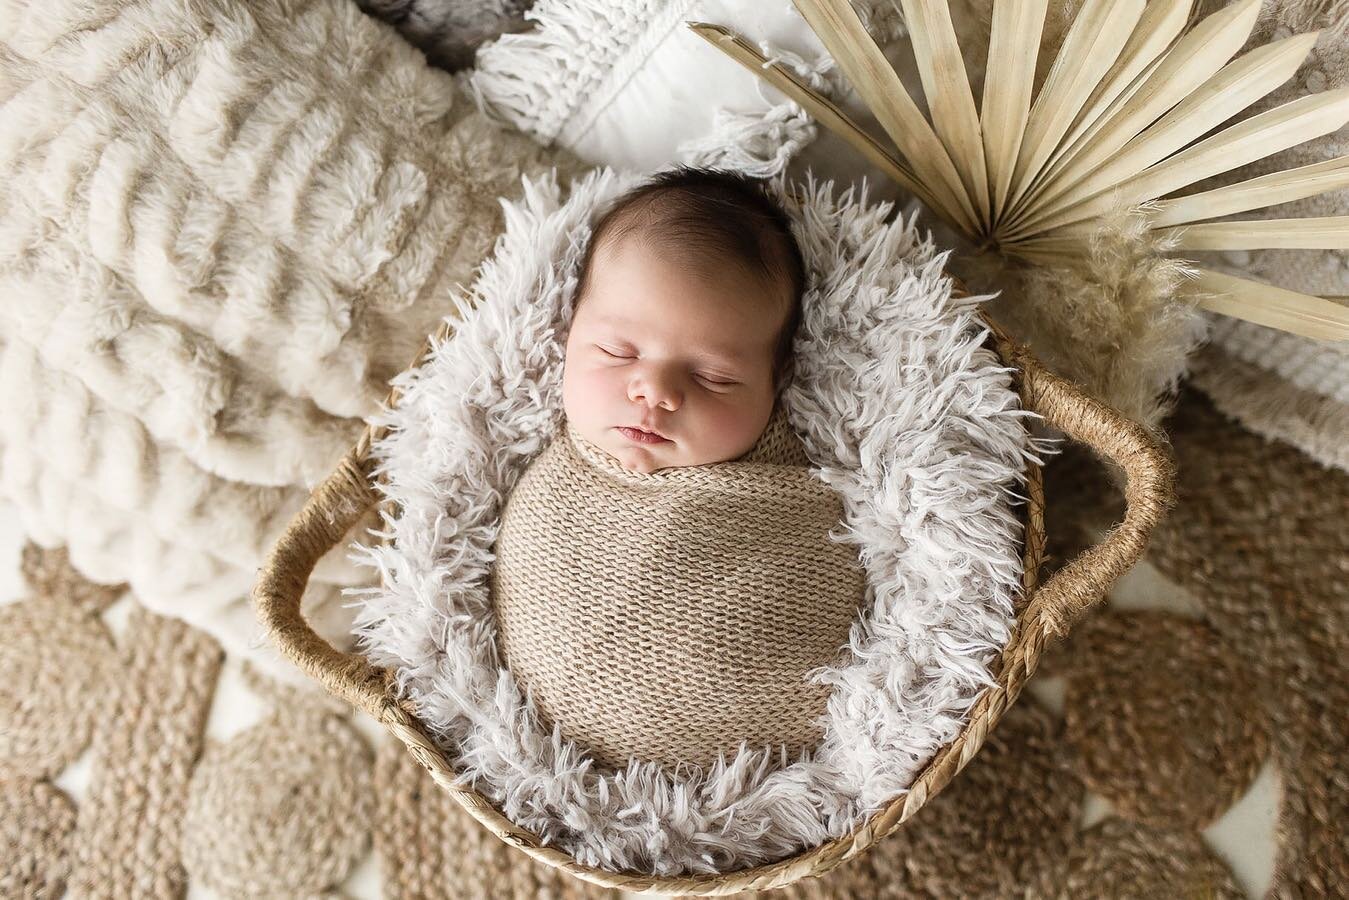 I&rsquo;ve been a little &ldquo;socials MIA&rdquo; since we went back into lockdown, but I forgot to post my last shoot, sweet little Henley 🤍 I&rsquo;m so glad we managed to squeeze him in @laura.gledhill #newborn #newbornphotography #sweetboy #bab